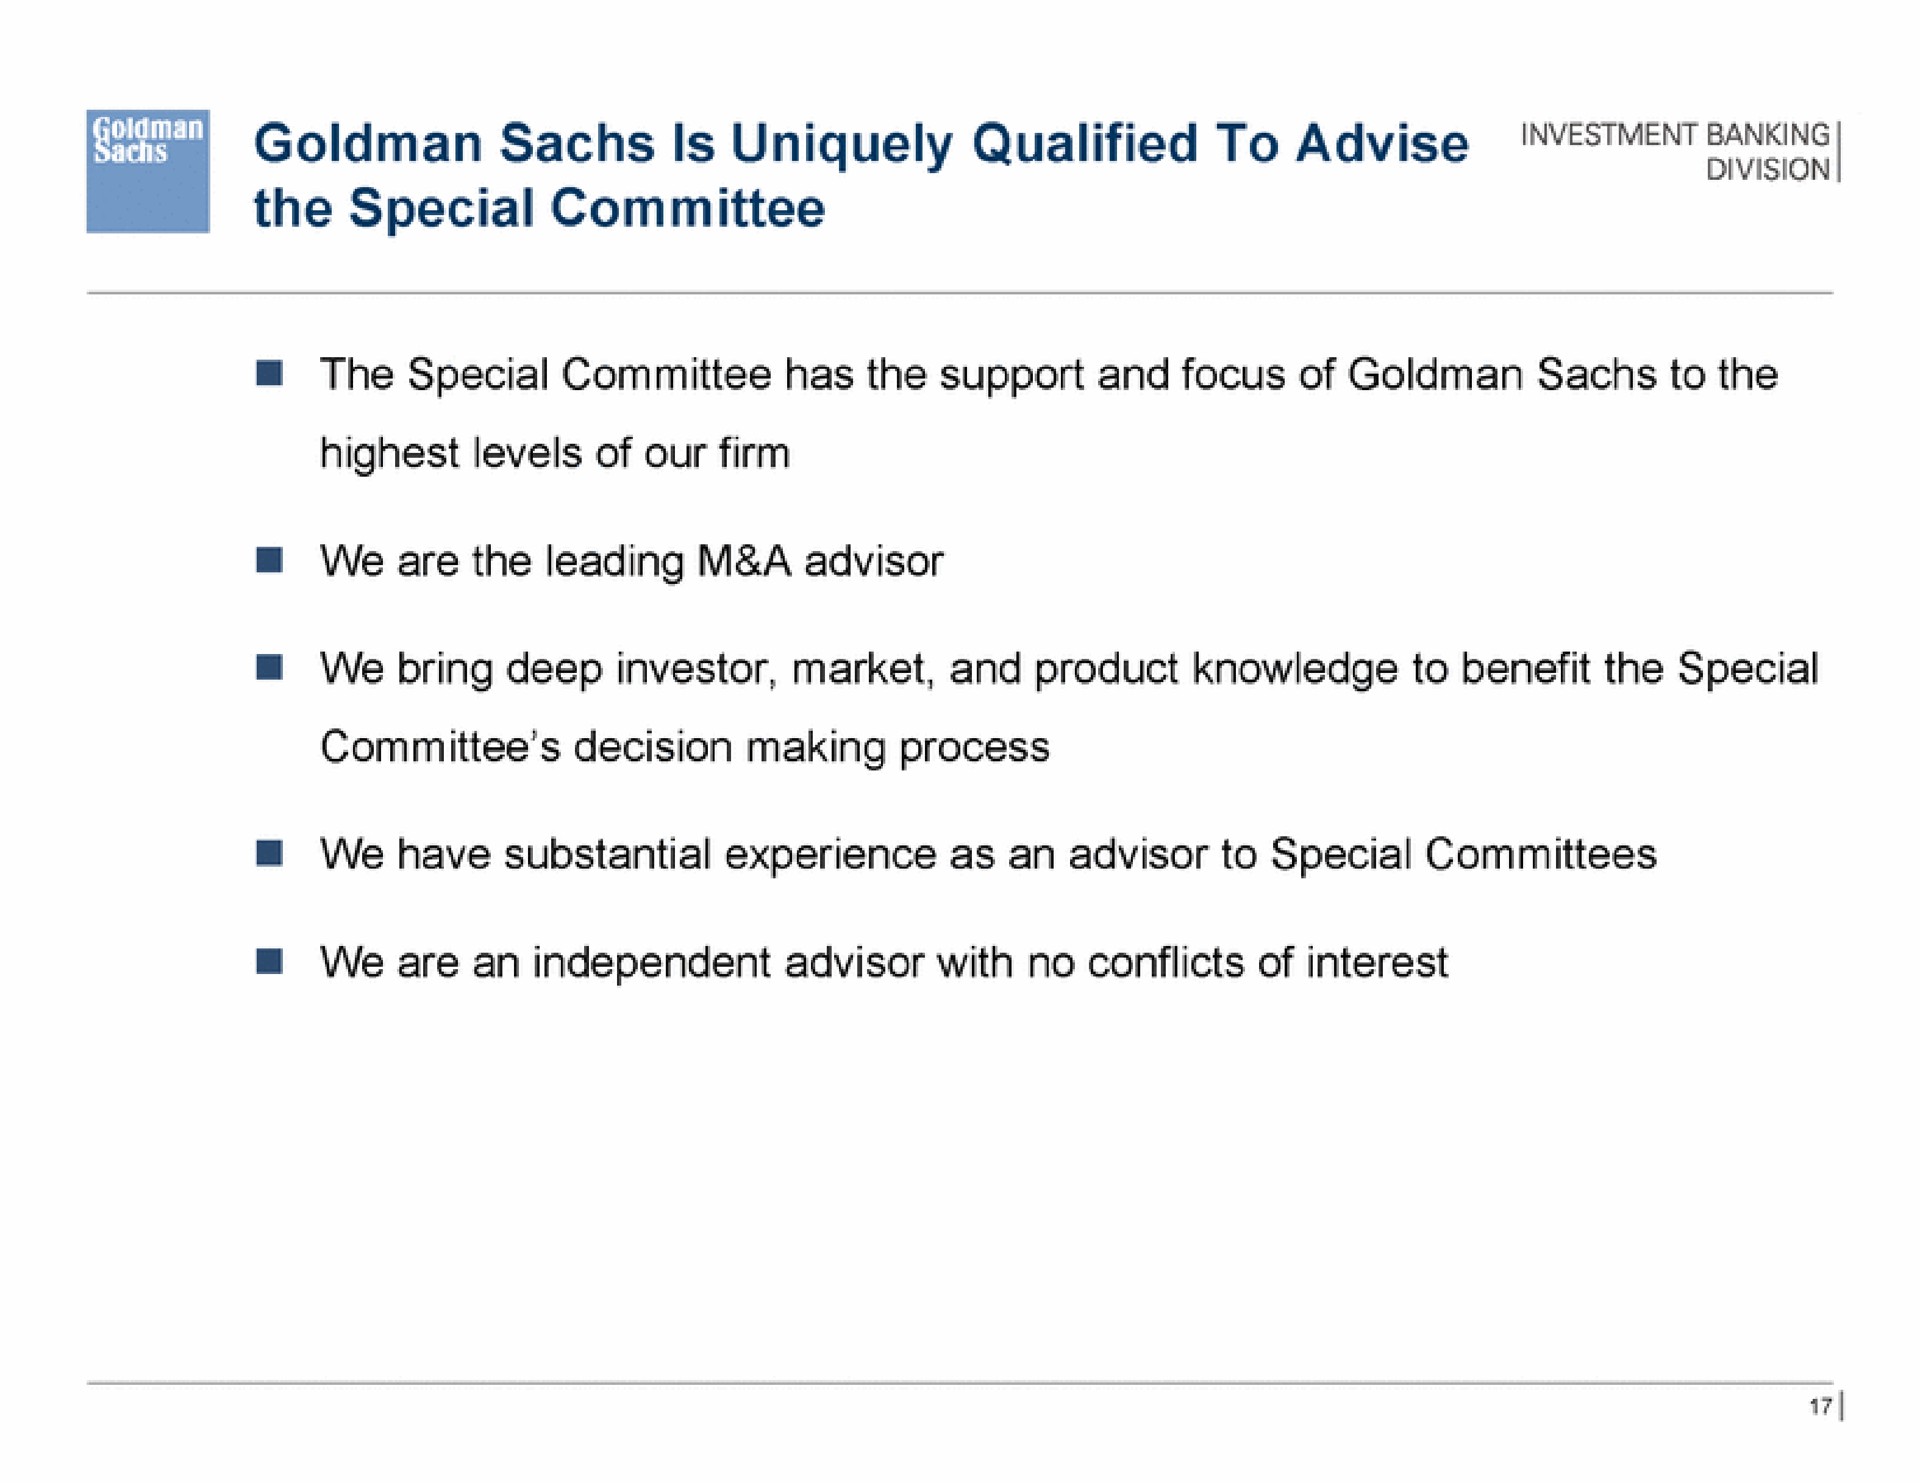 sai is uniquely qualified to advise banking the special committee | Goldman Sachs